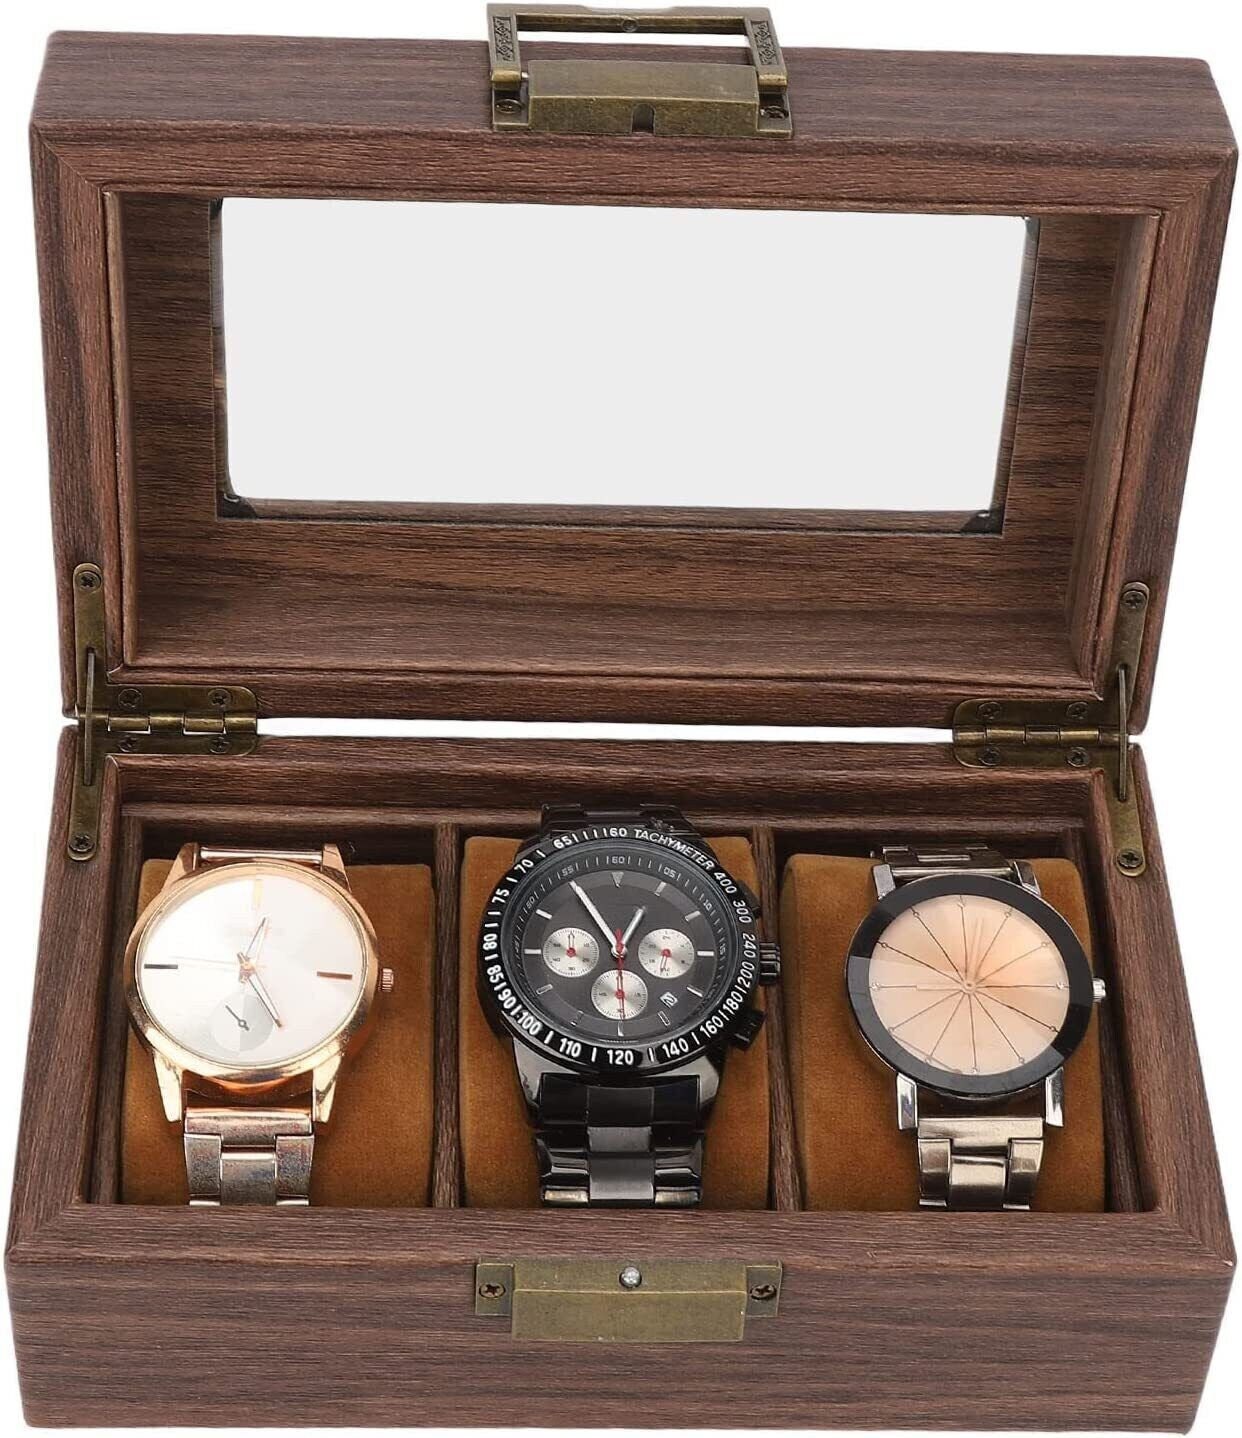 Notakia Watch Jewelry Box for Men 3 Slot Watch Box,Large Watch Display Case Organizer with Real Glass Window Top (3 Slots)